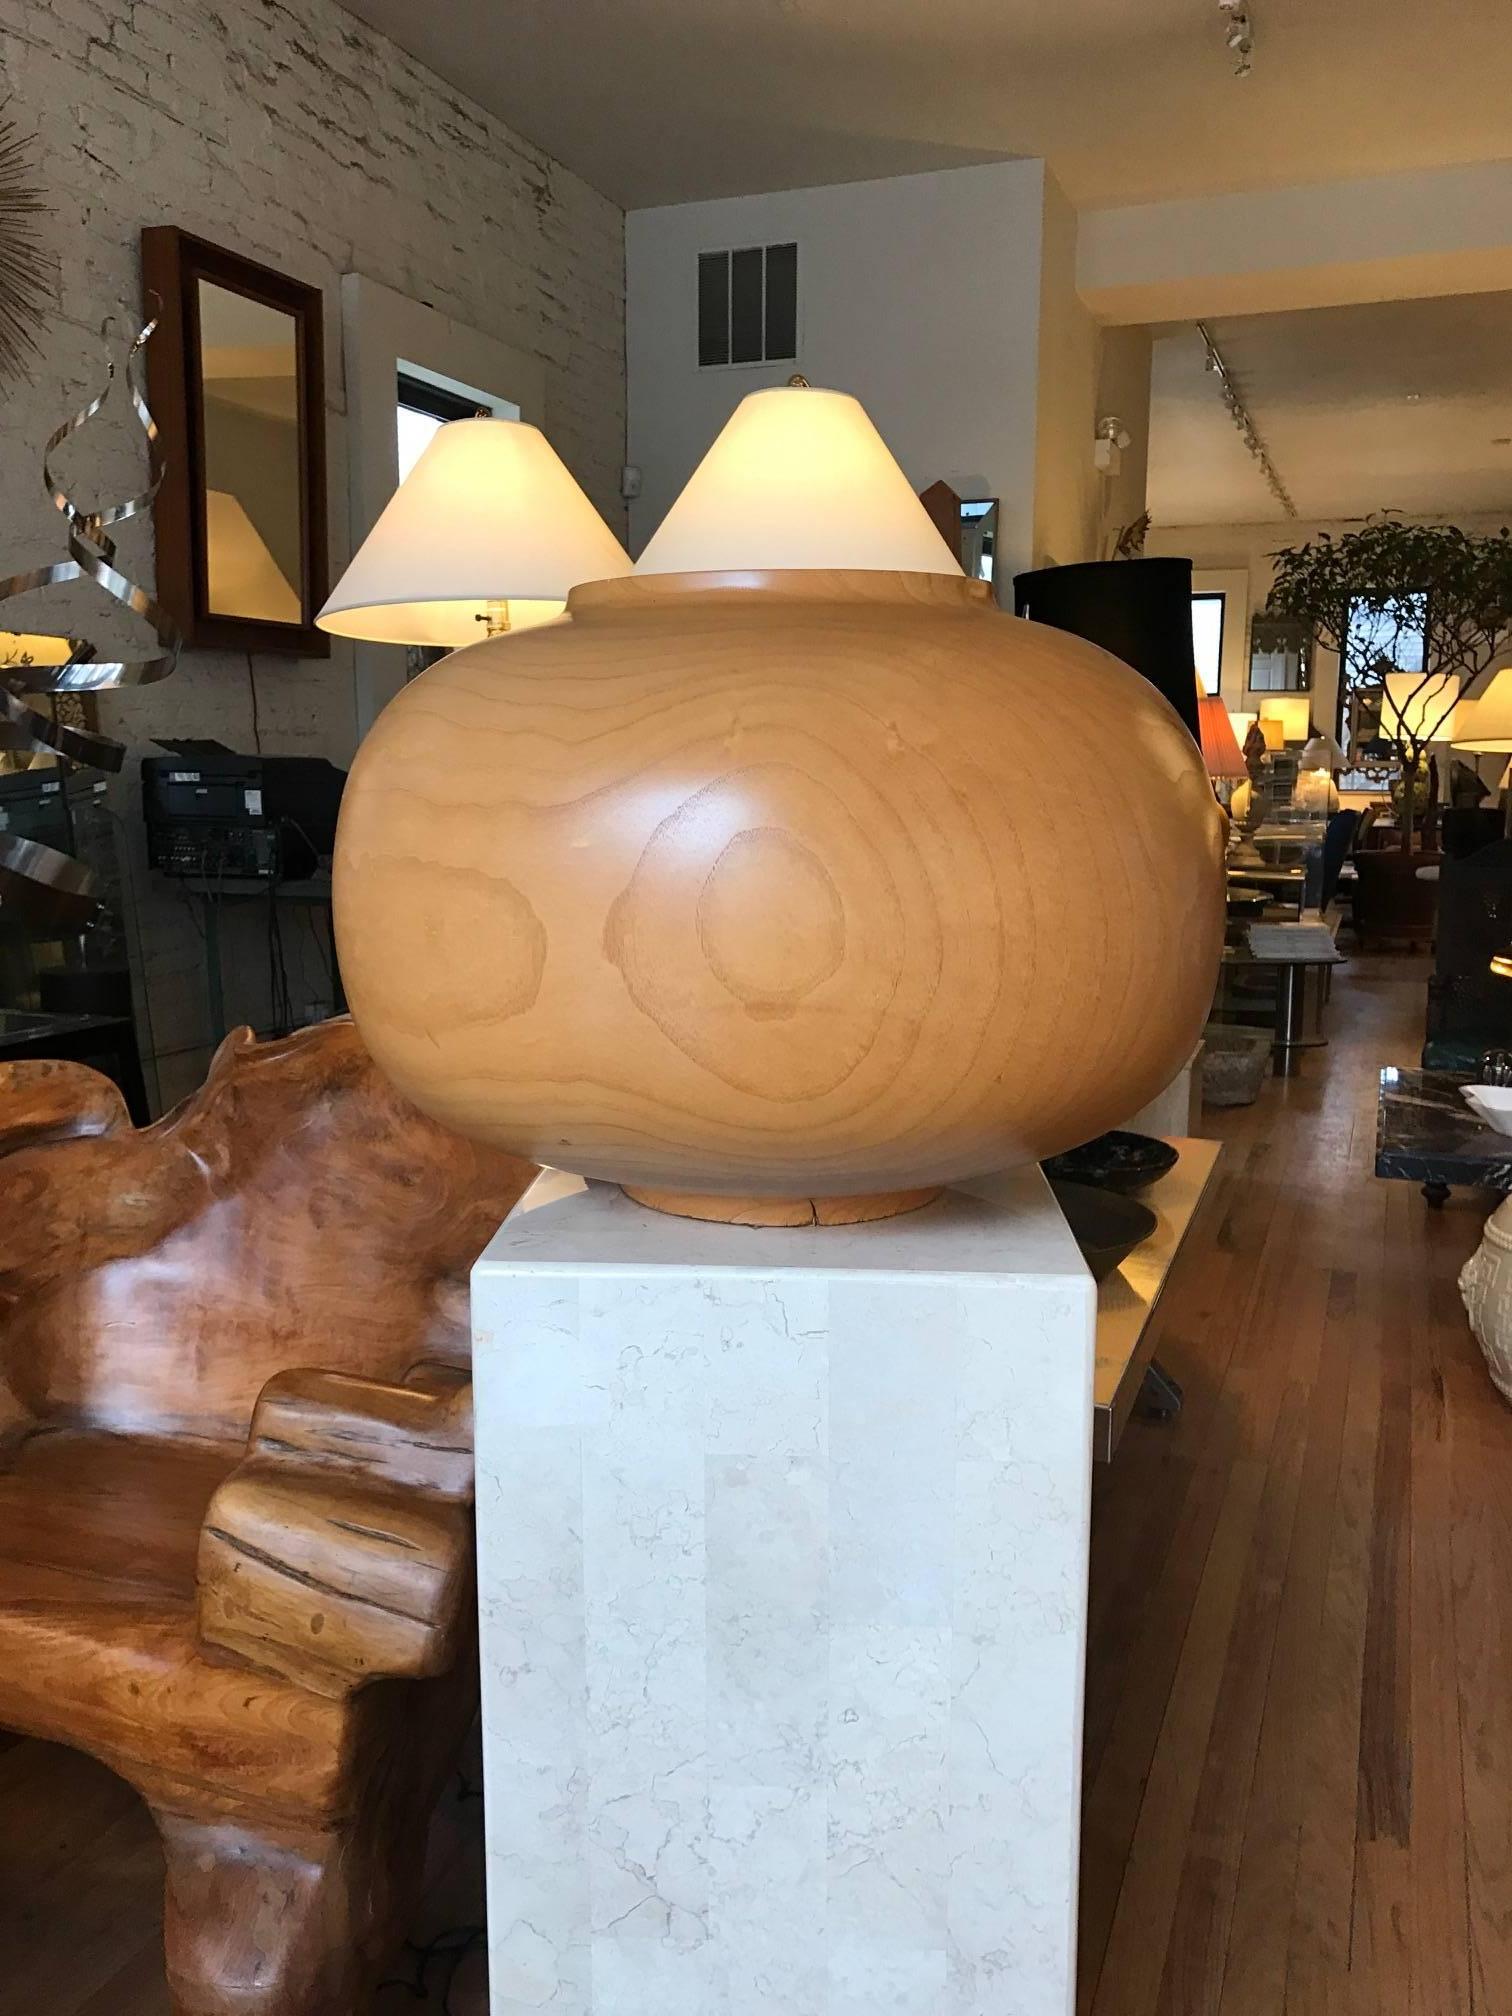 Large hollow form hand-carved ash vessel or vase by Laguna Beach artist Rene Mergroz. Mr Mergroz's work is in the Smithsonian collection. It is signed and dated 1990. This highly sculptural vessel has a rich overall grain pattern. Amongst the